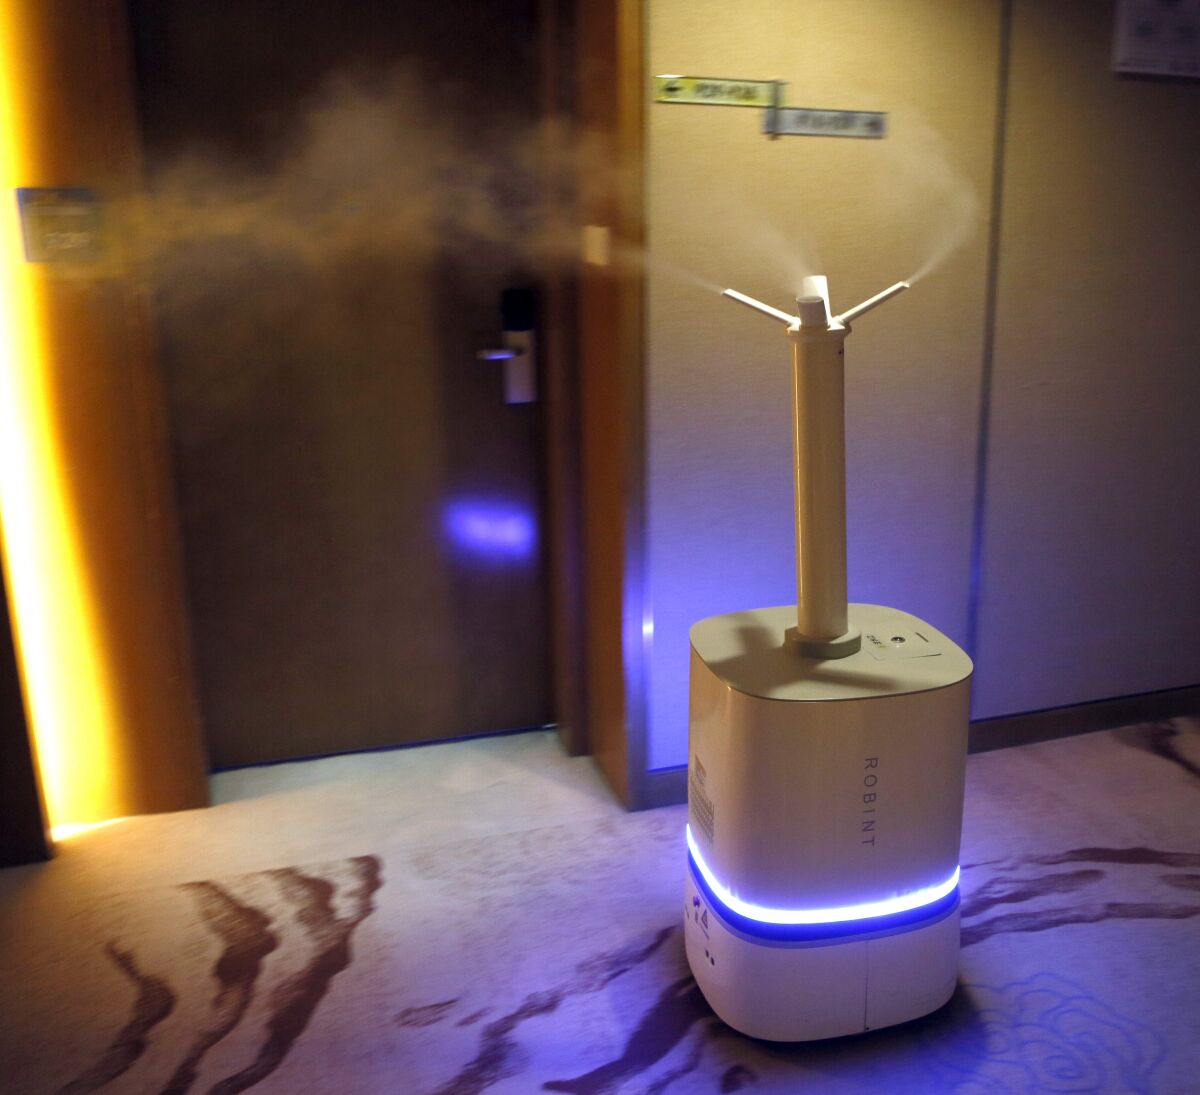 A robot sprays disinfectant in a hallway of the Crowne Plaza Sun Palace hotel in Beijing.